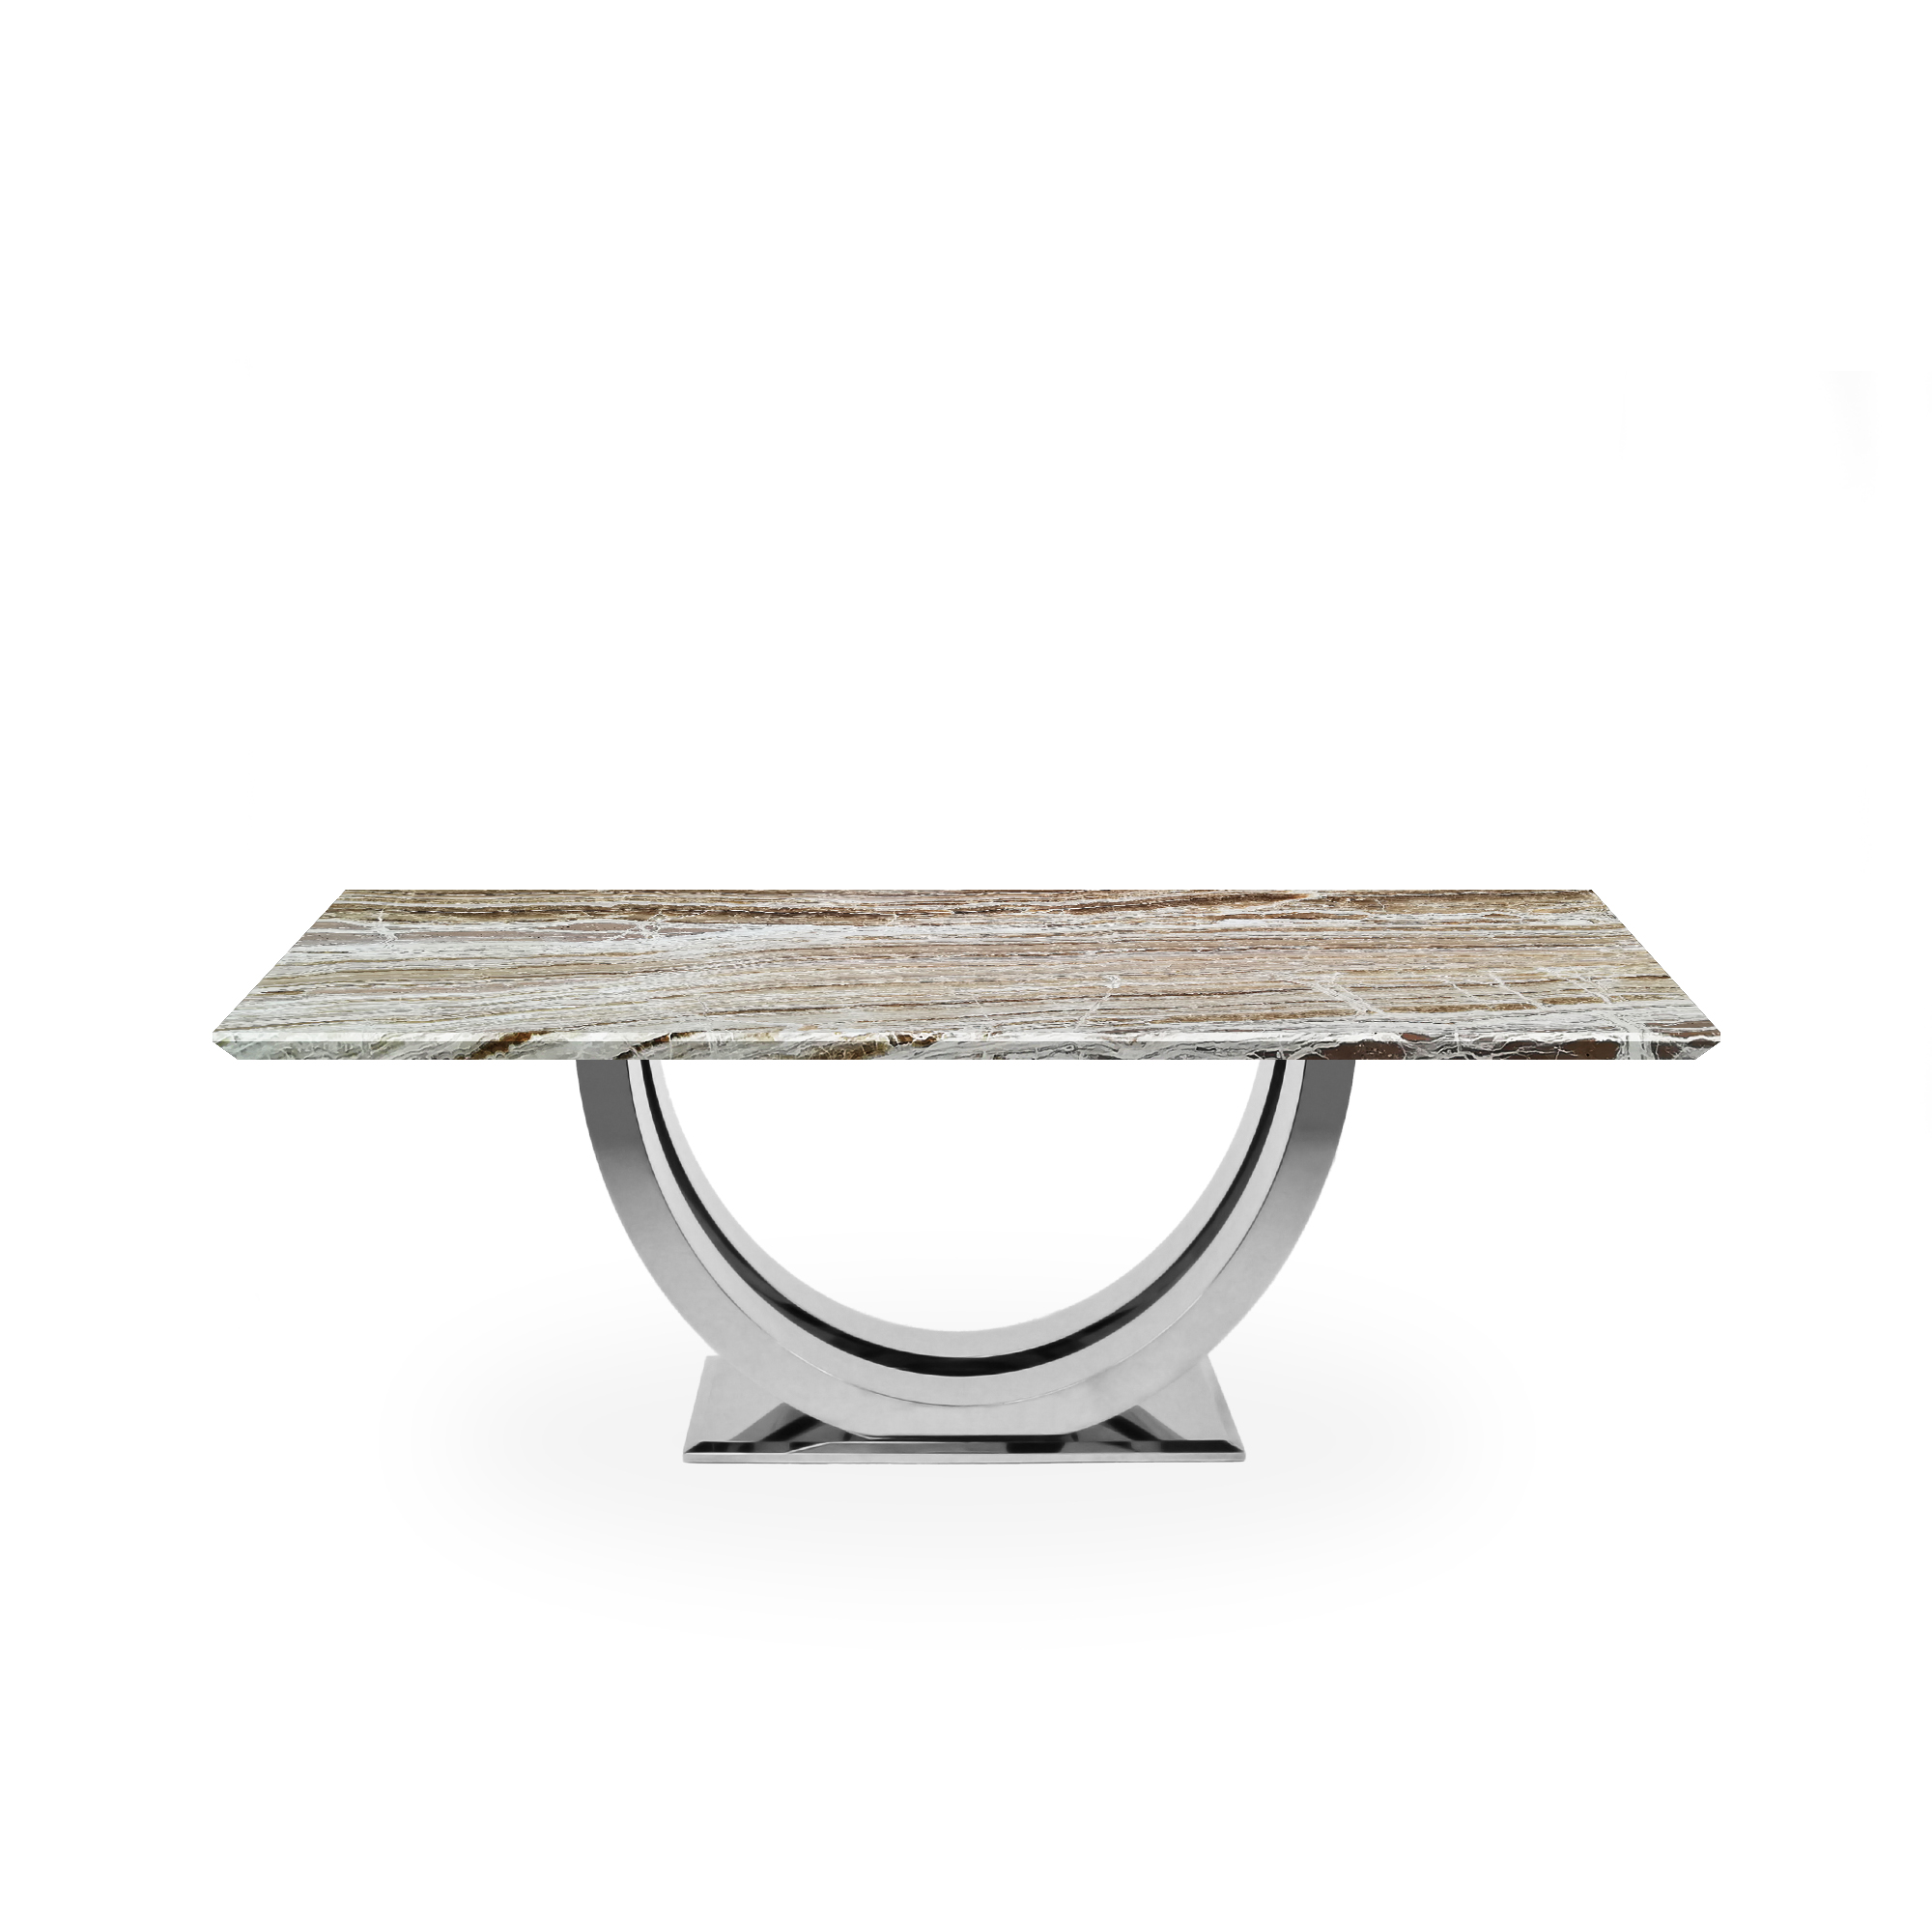 VANNA | Decasa Marble Marble Dining Table